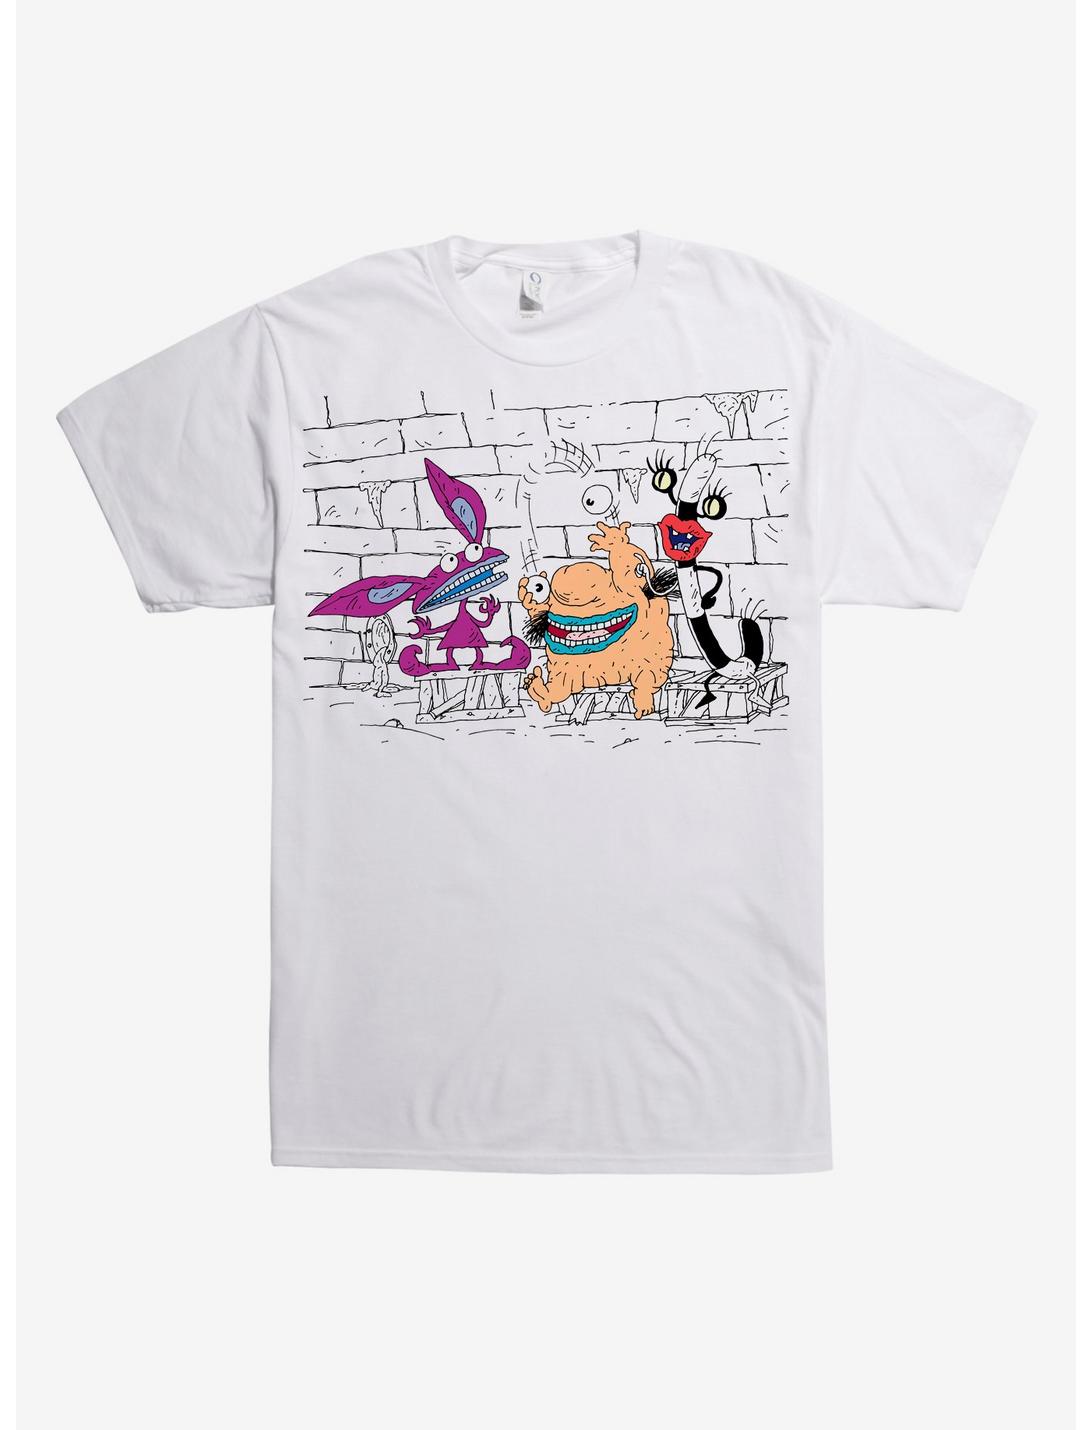 Aaahh!!! Real Monsters Group T-Shirt, WHITE, hi-res